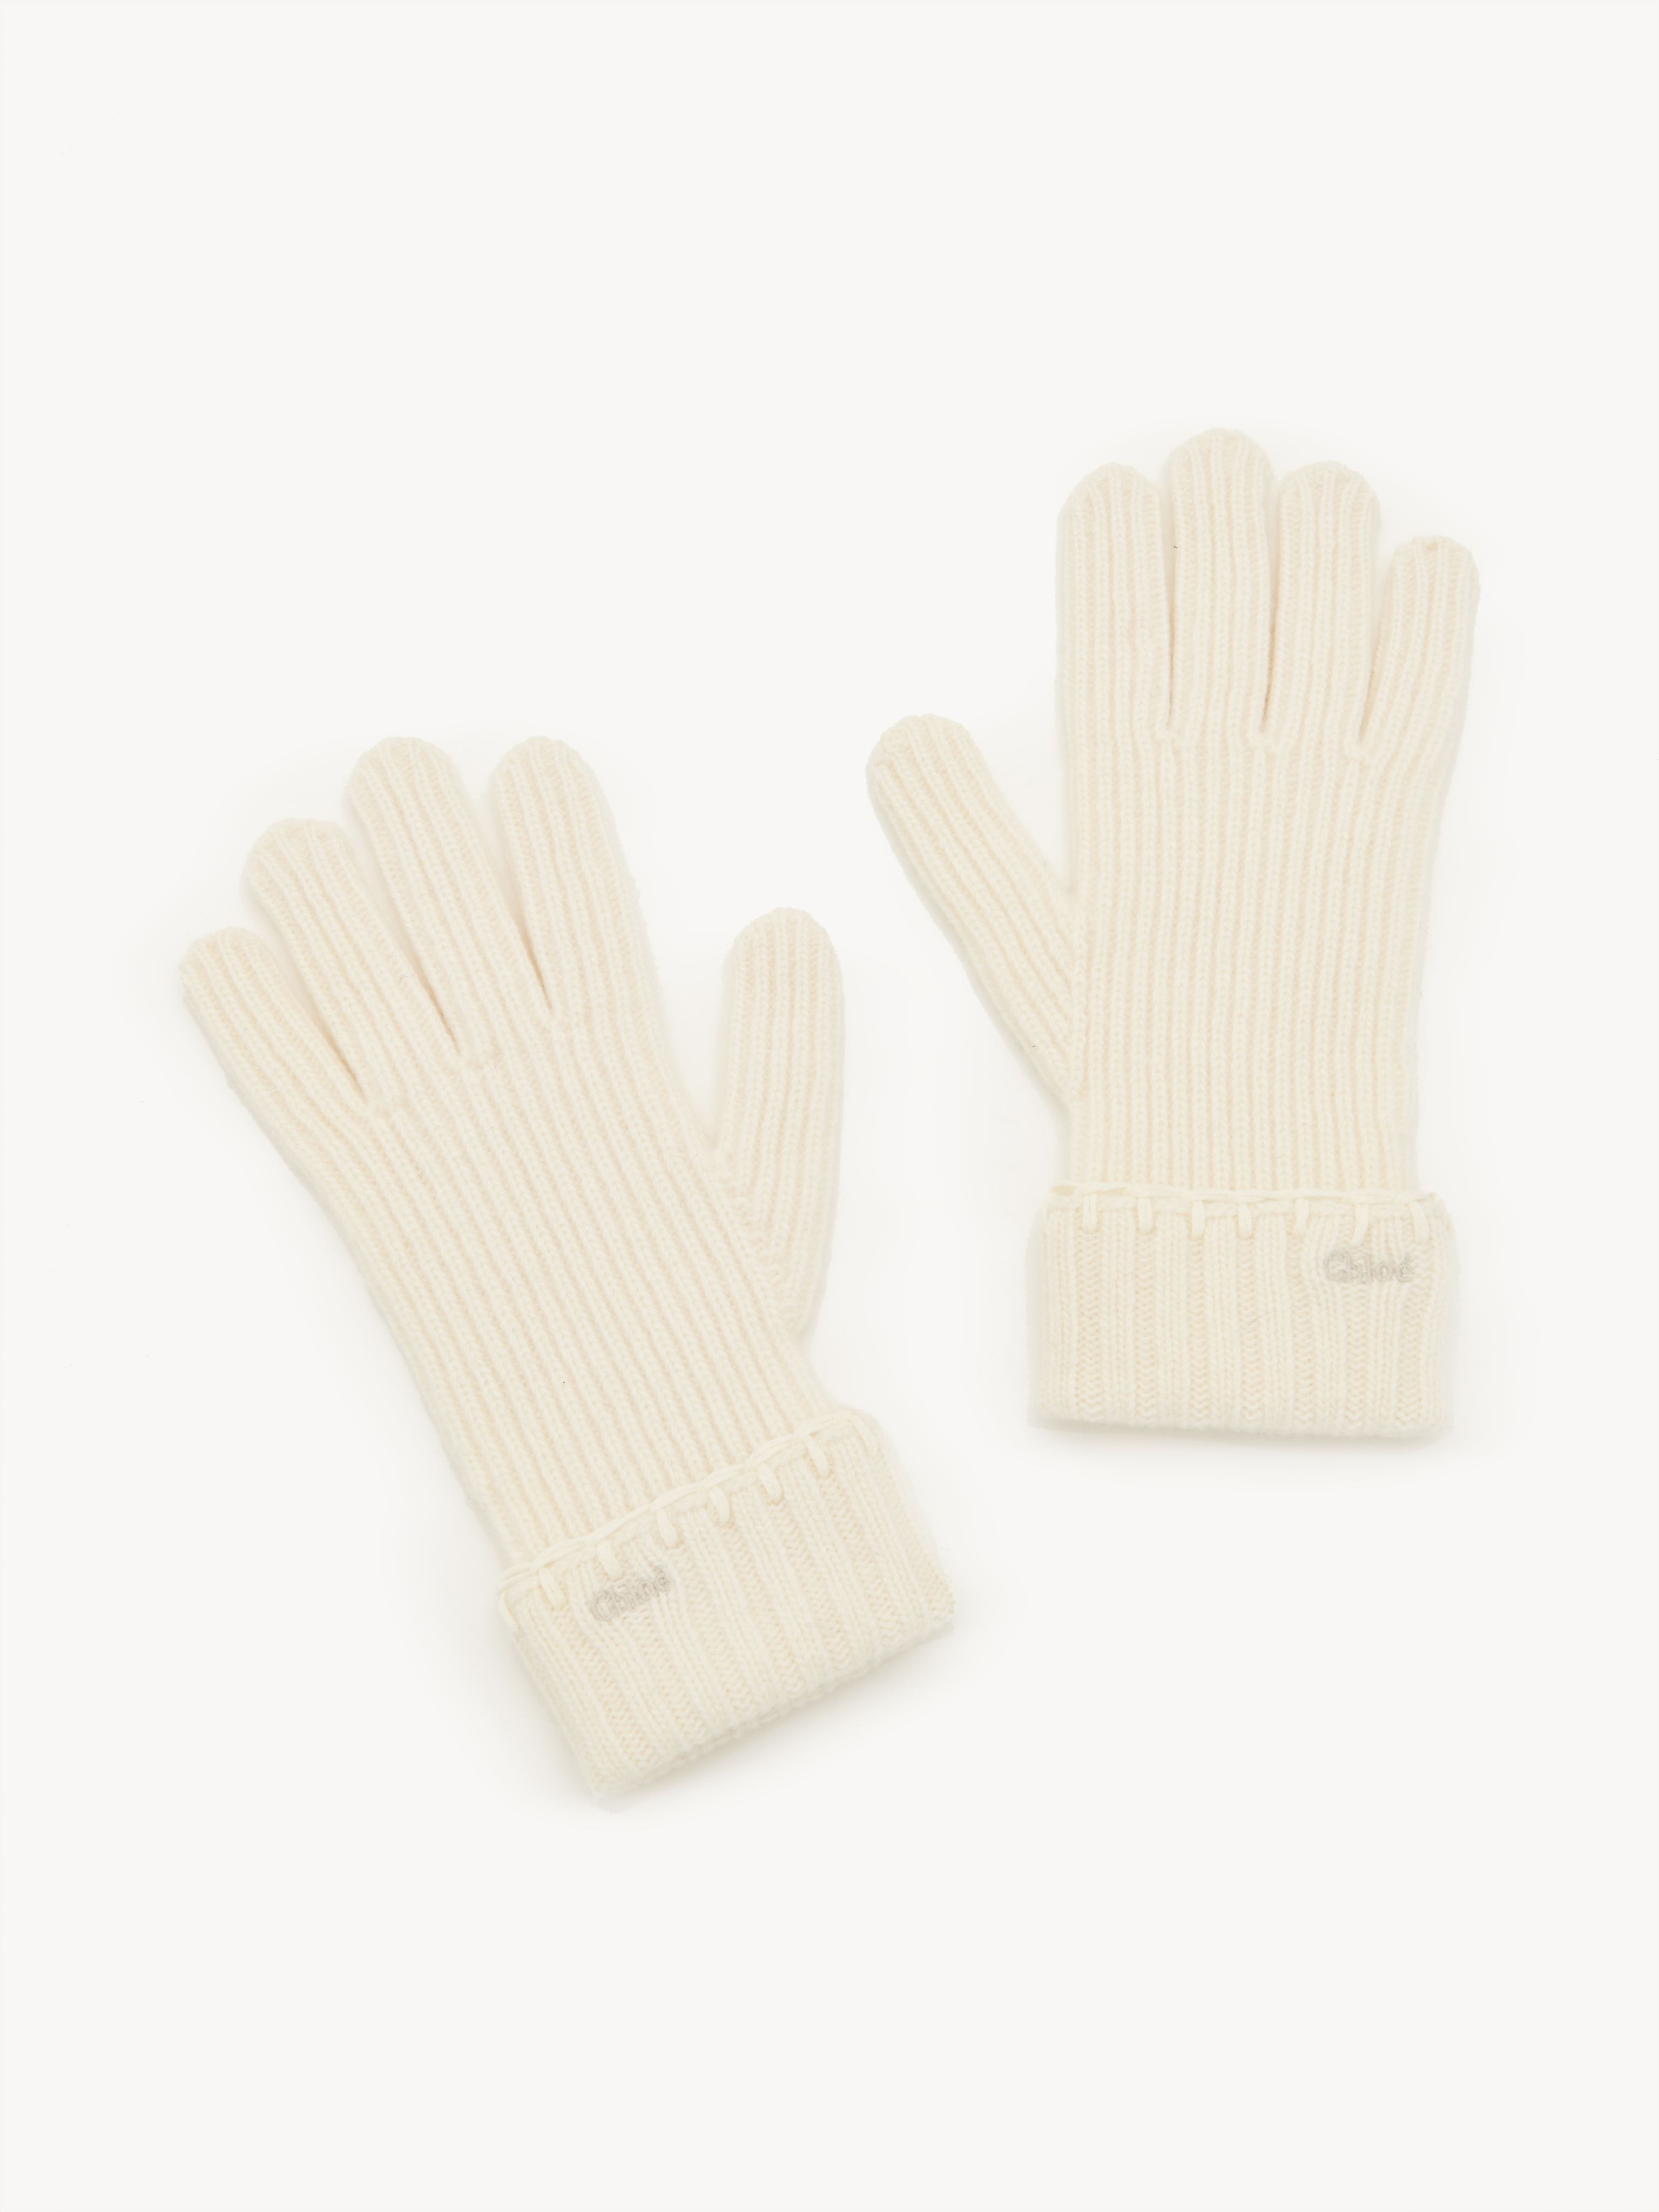 Chloé Gloves In Superfine Wool & Cashmere White Size Onesize 69% Wool, 29% Cashmere, 2% Cotton